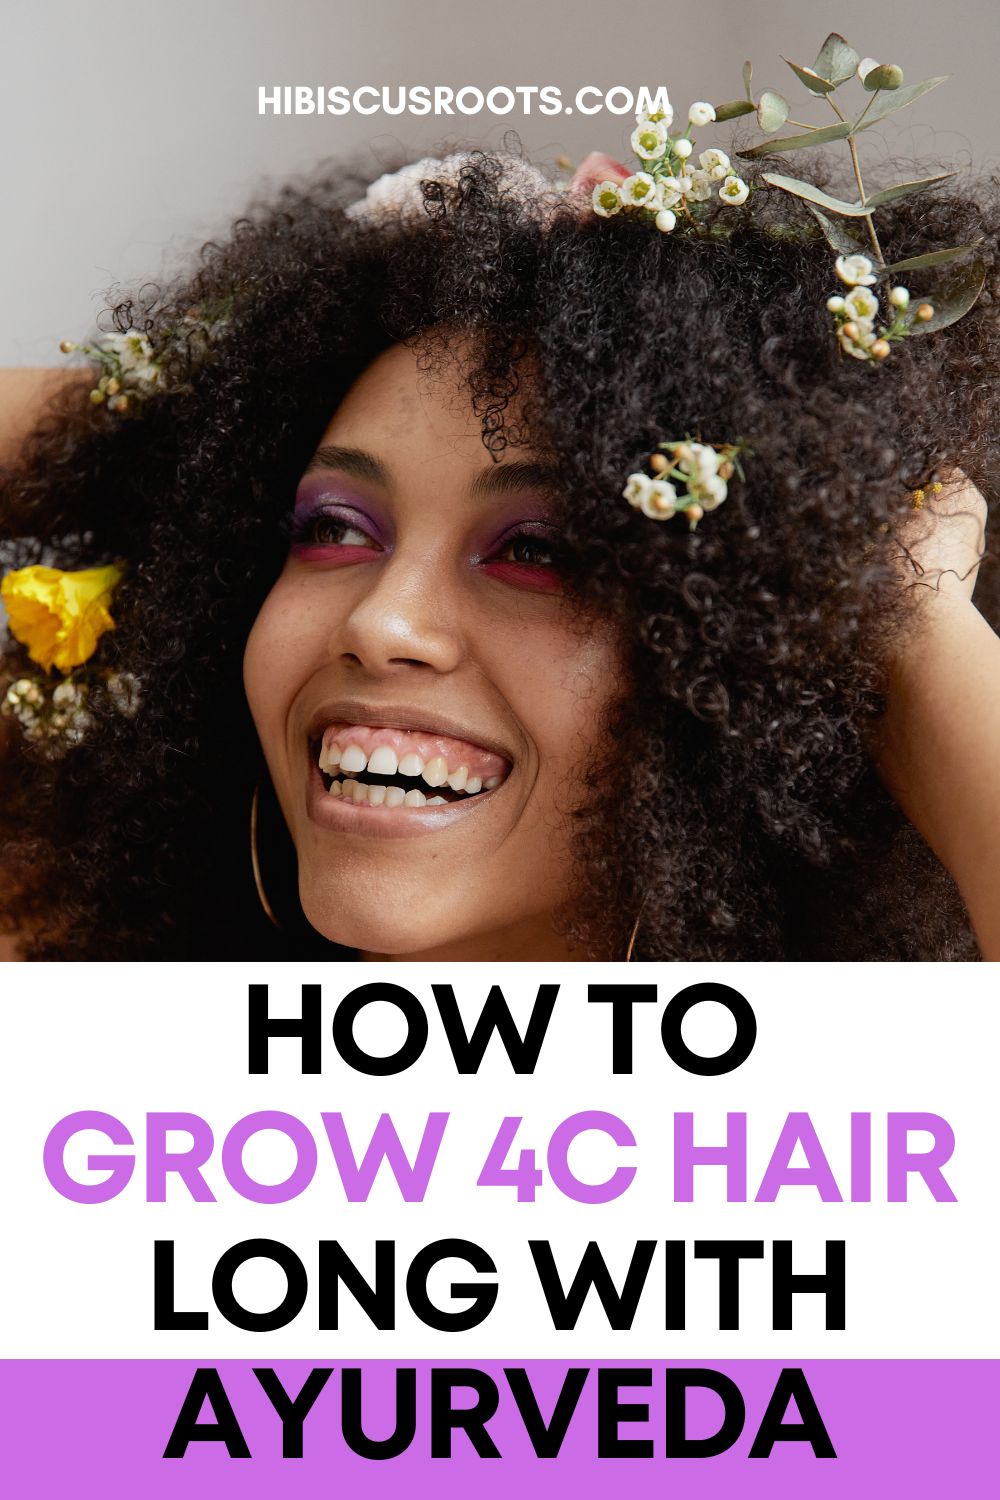 Ultimate Guide to Ayurvedic 4C Hair Growth in 2022